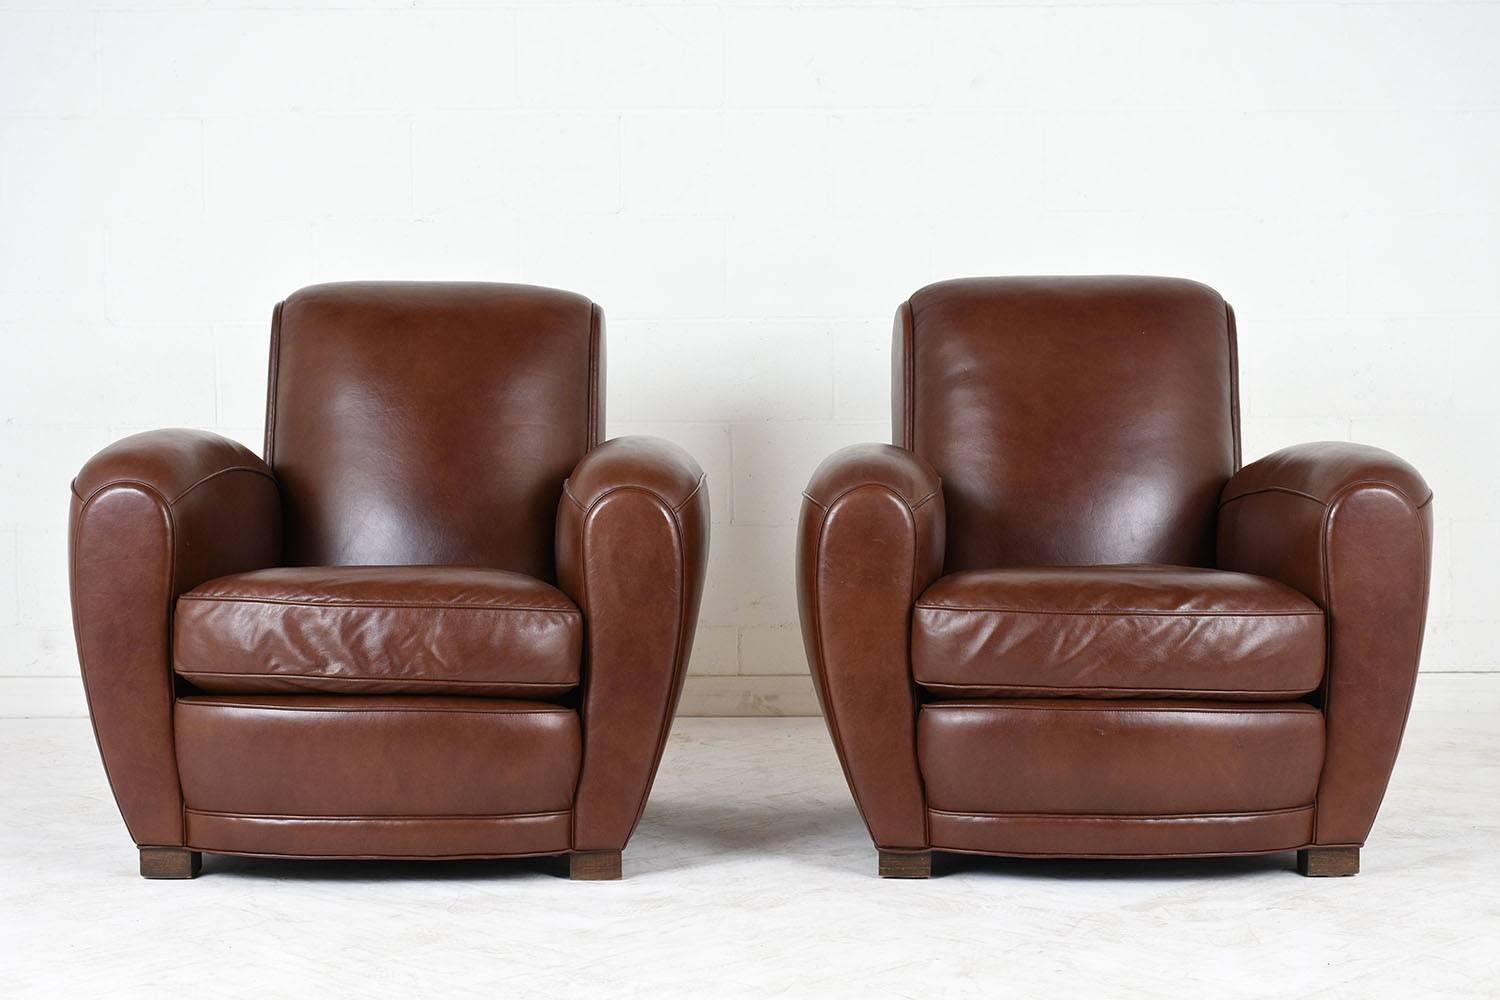 This Pair of 1950's Art-Deco Club Chairs are in very good condition, features its original brown leather upholstery with single piping trim details and brass nailhead trim along the back. The chairs each have a single removable seat cushion with